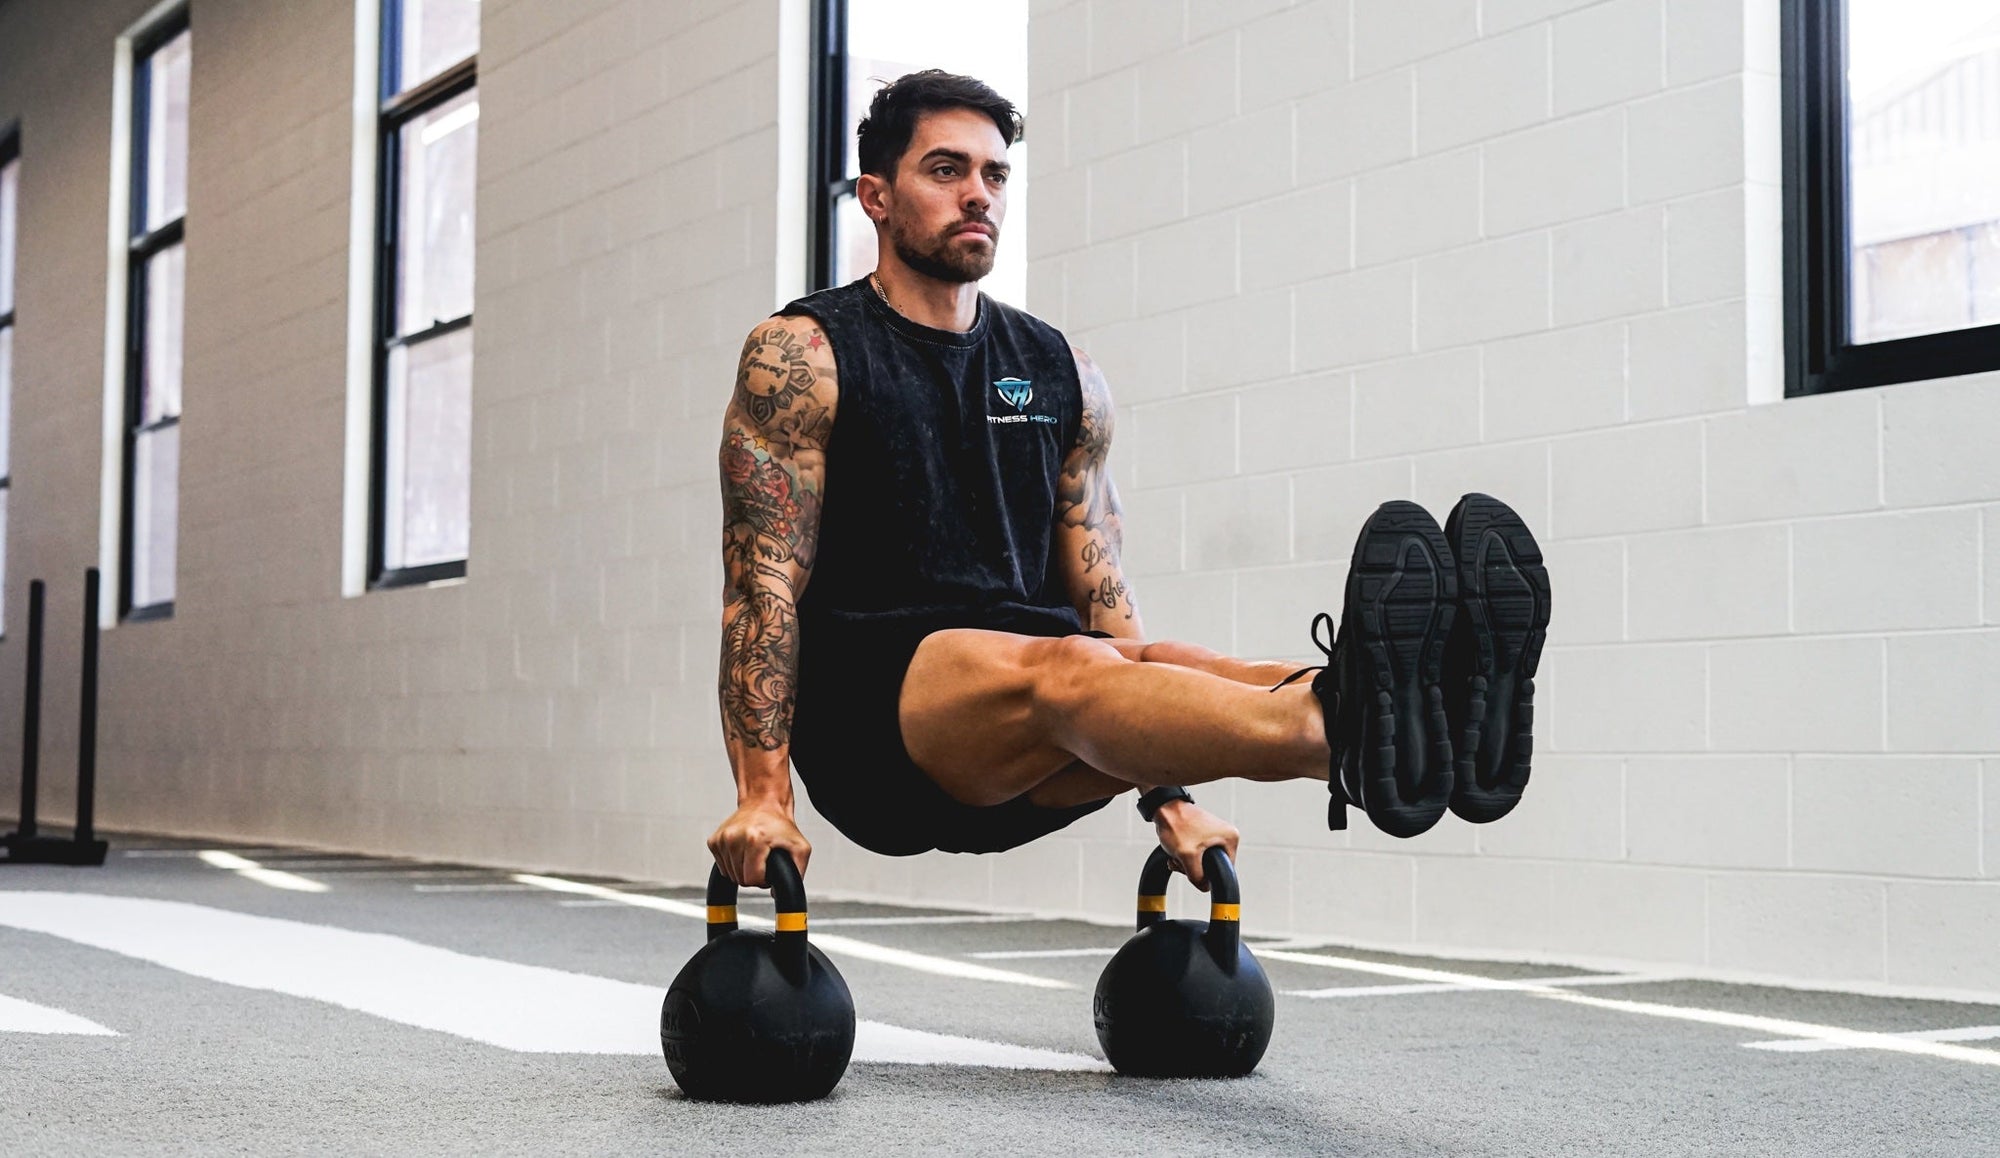 man working out using kettlebells for isometric l-sit exercise